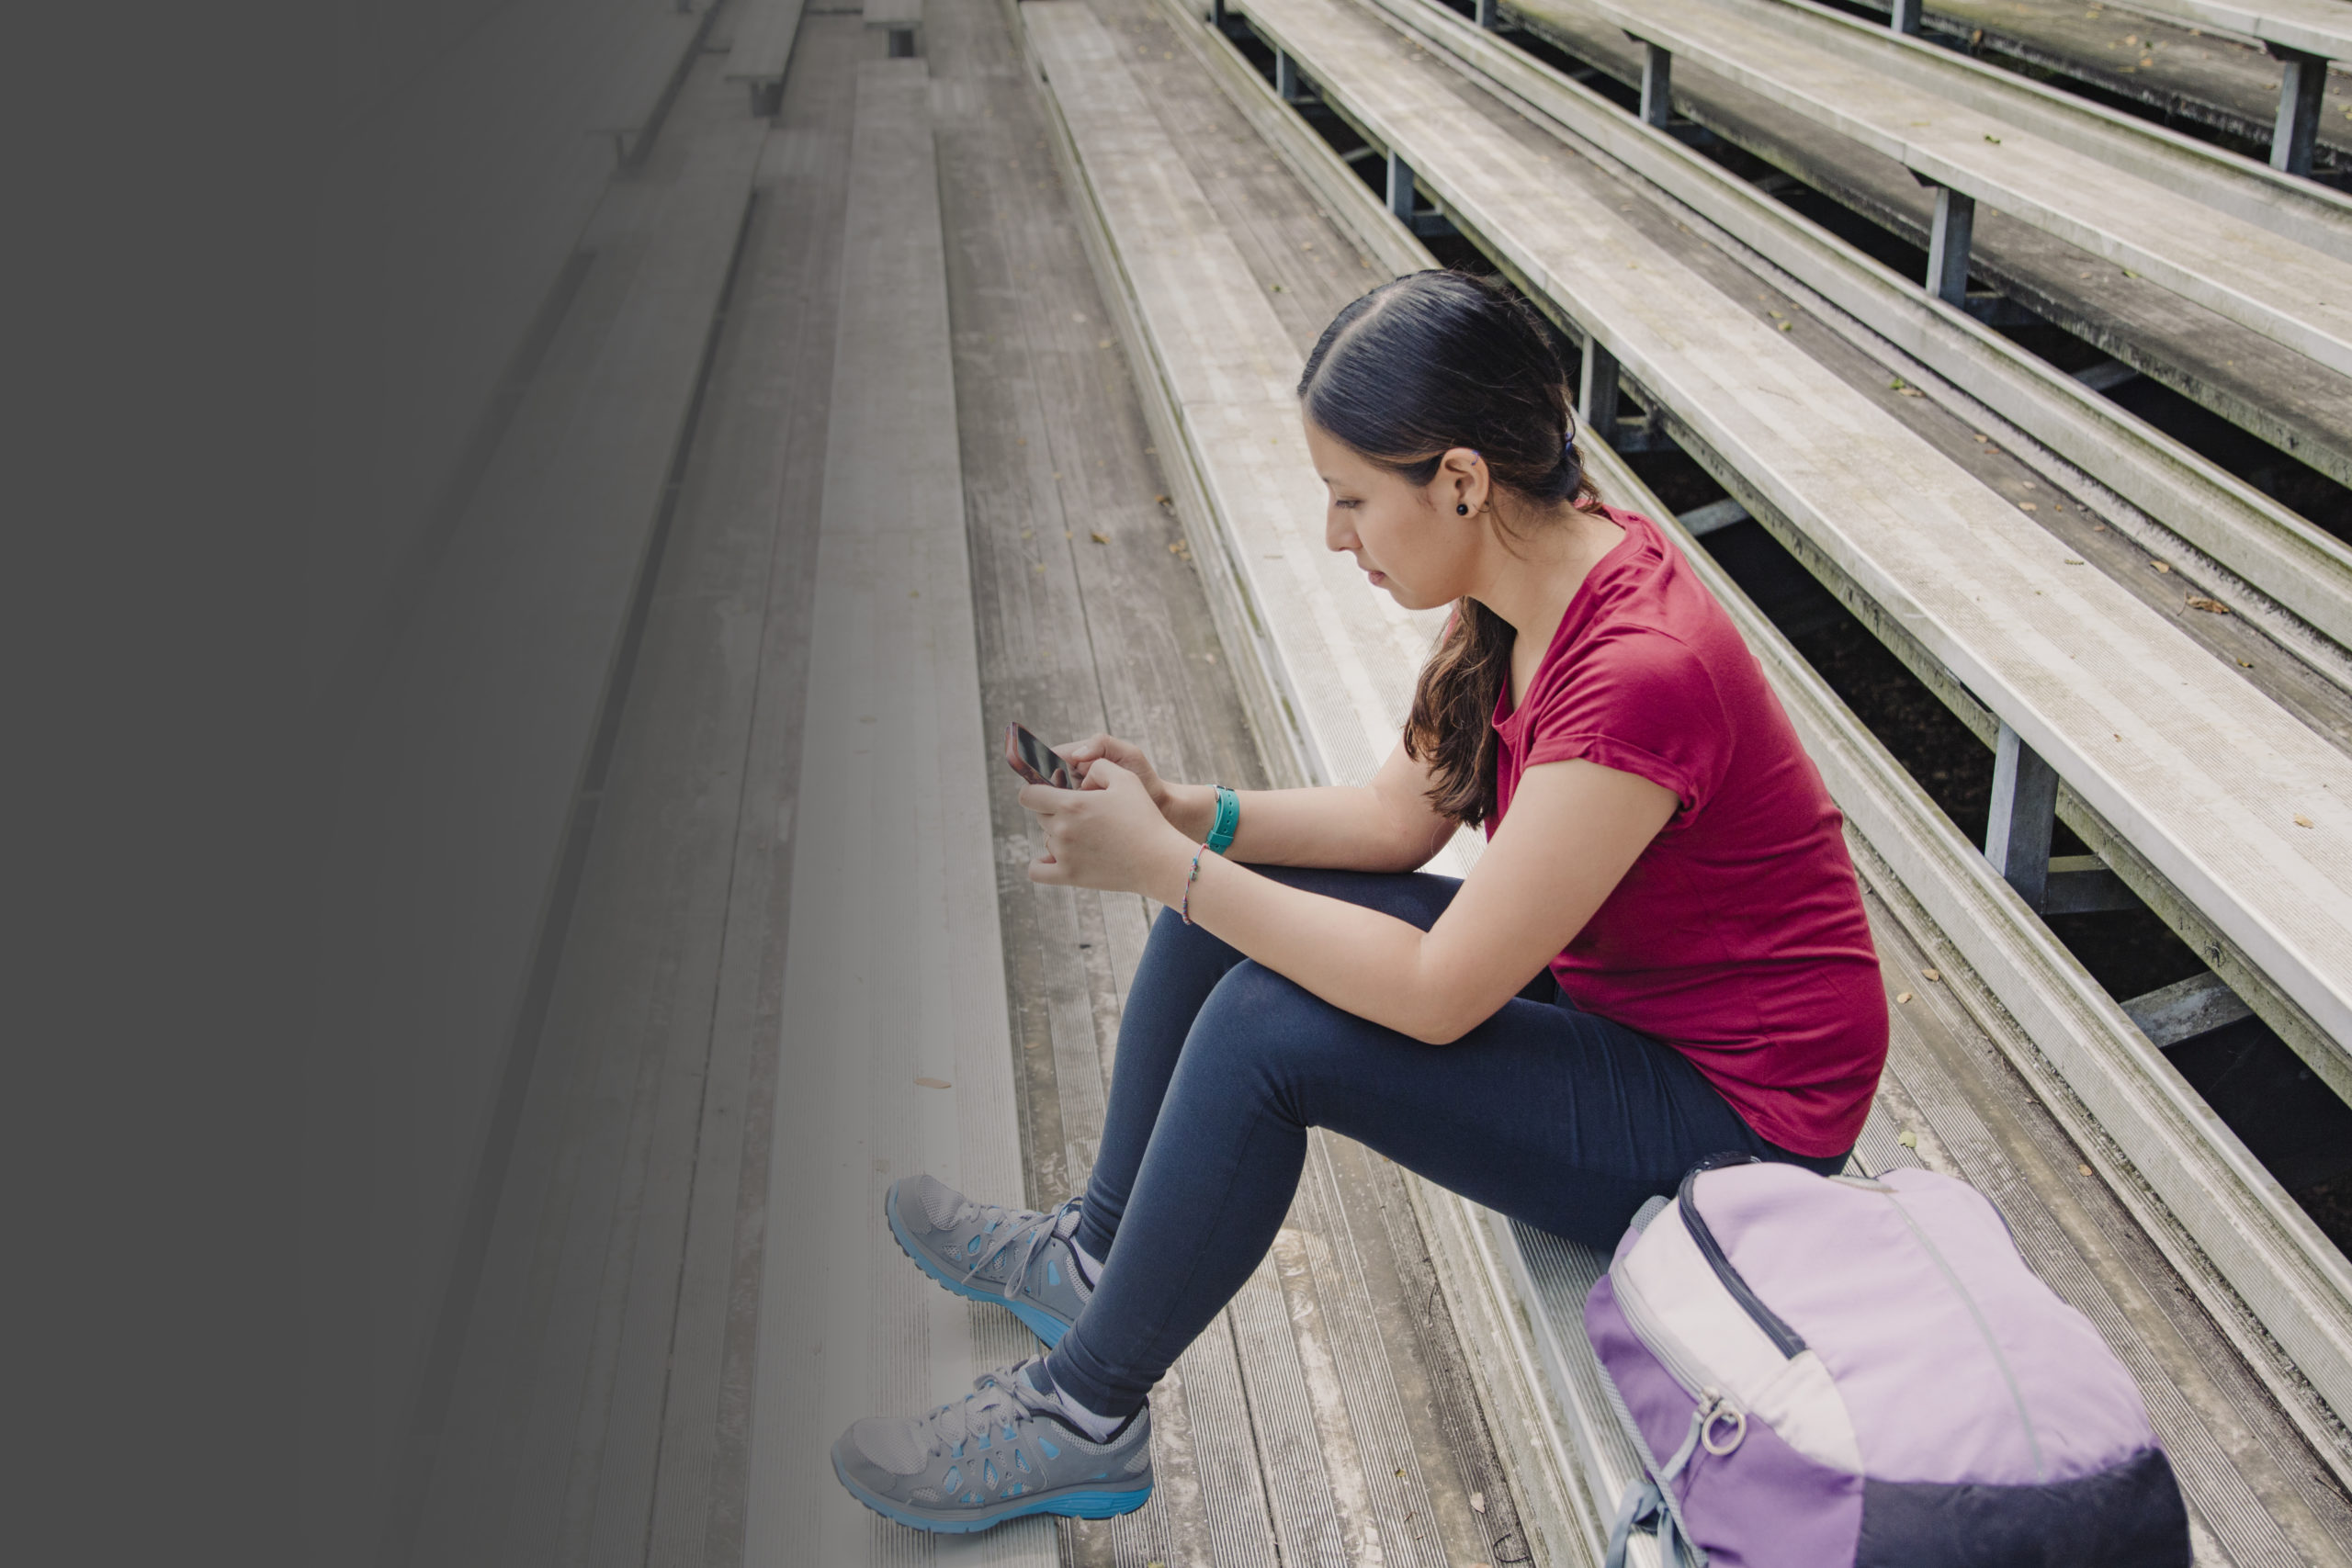 Image Of A Young Hispanic Woman On Her Smart Phone, Dramatic Perspective Seating Of Bleachers